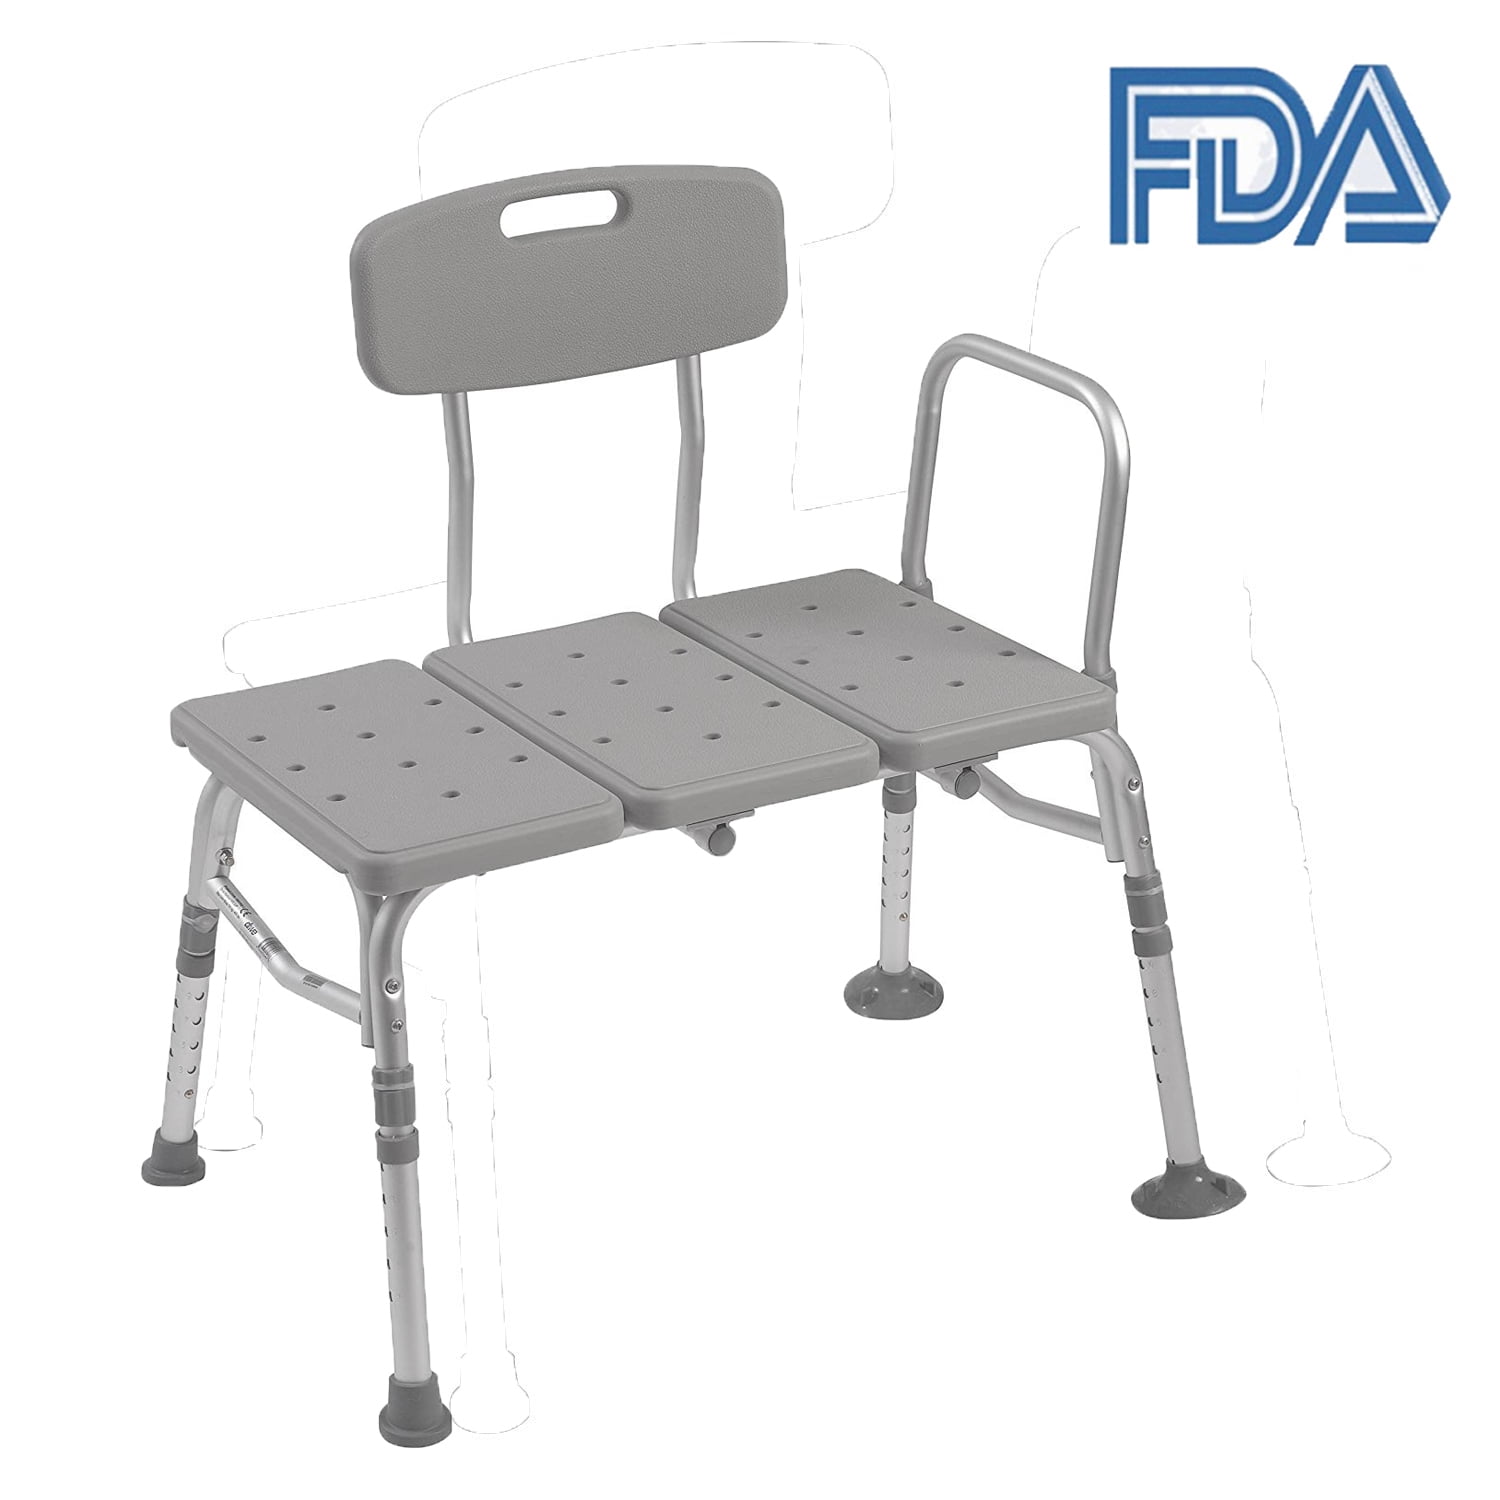 shower stools for disabled